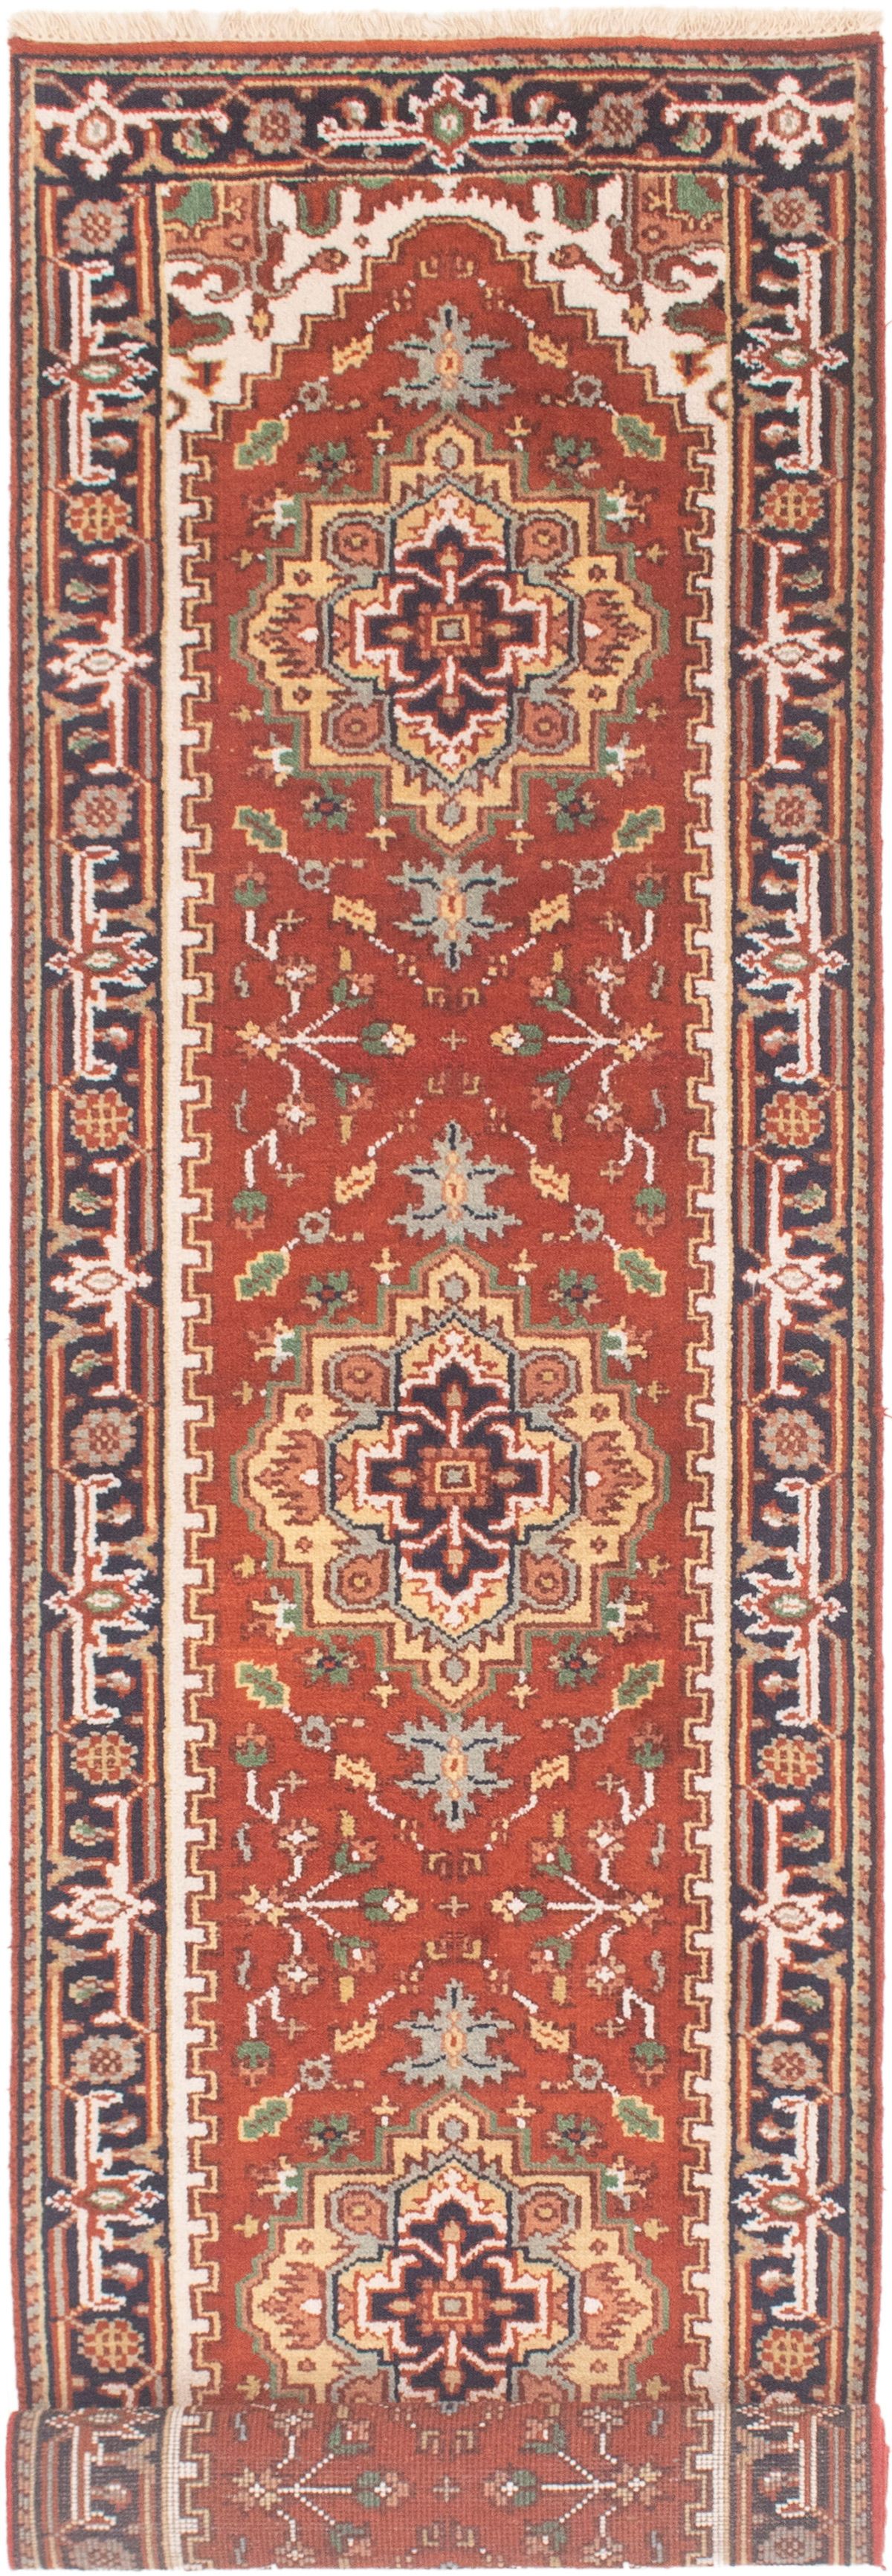 Hand-knotted Serapi Heritage Copper Wool Rug 2'7" x 12'1"  Size: 2'7" x 12'1"  